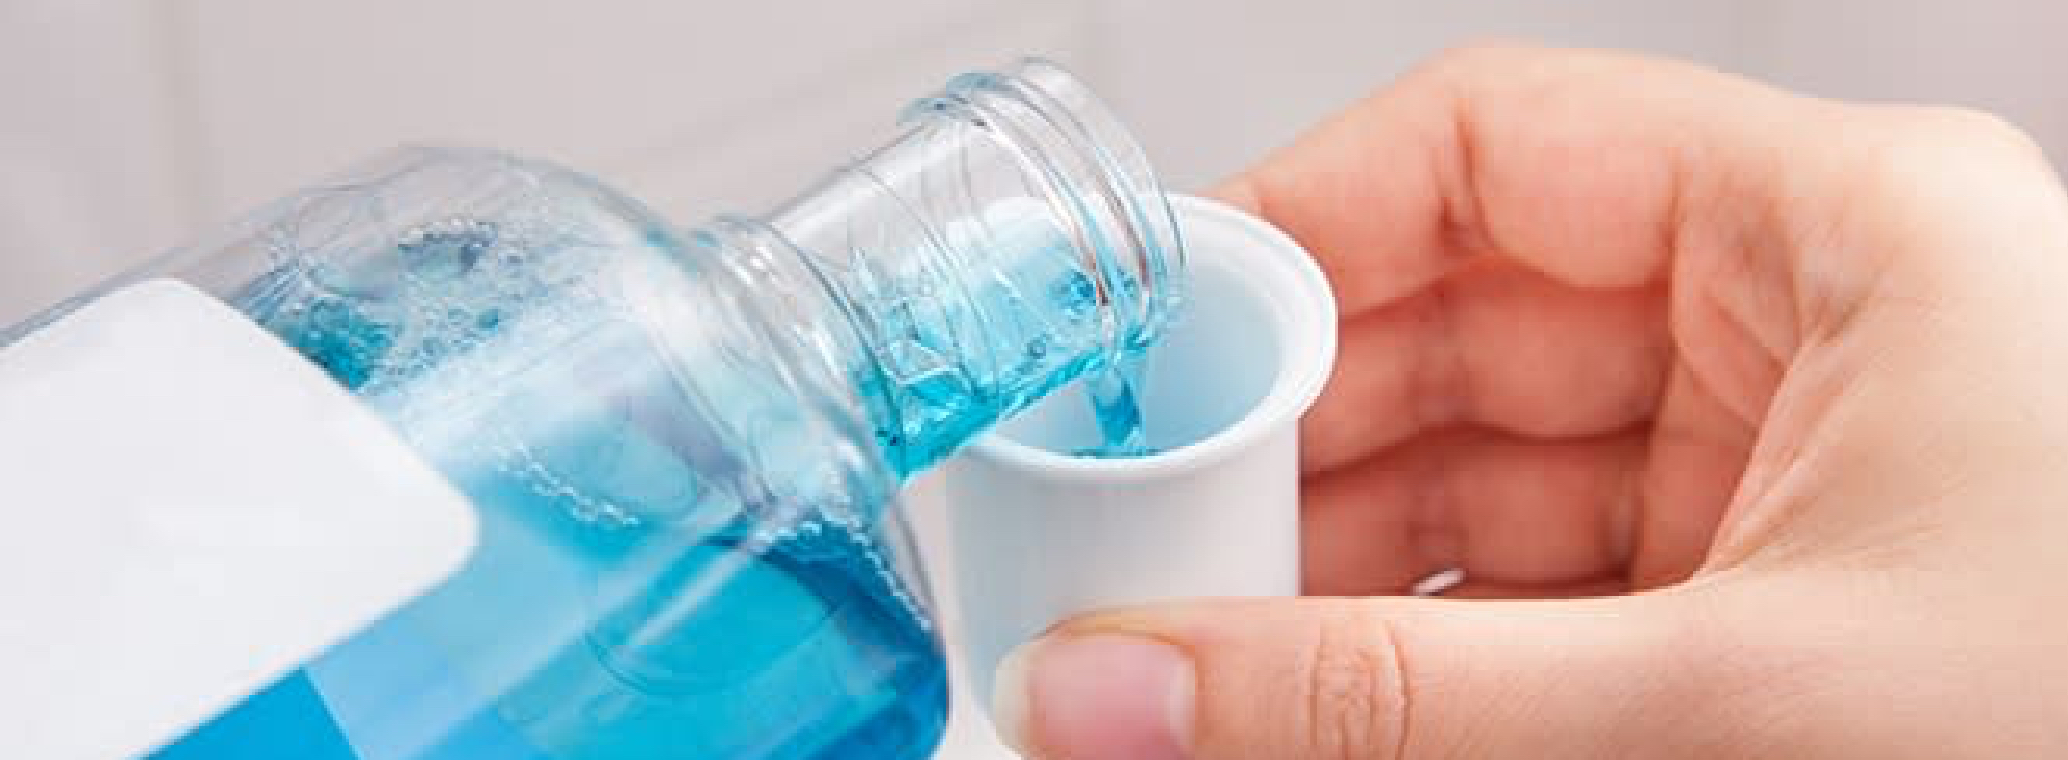 How to use Mouthwash